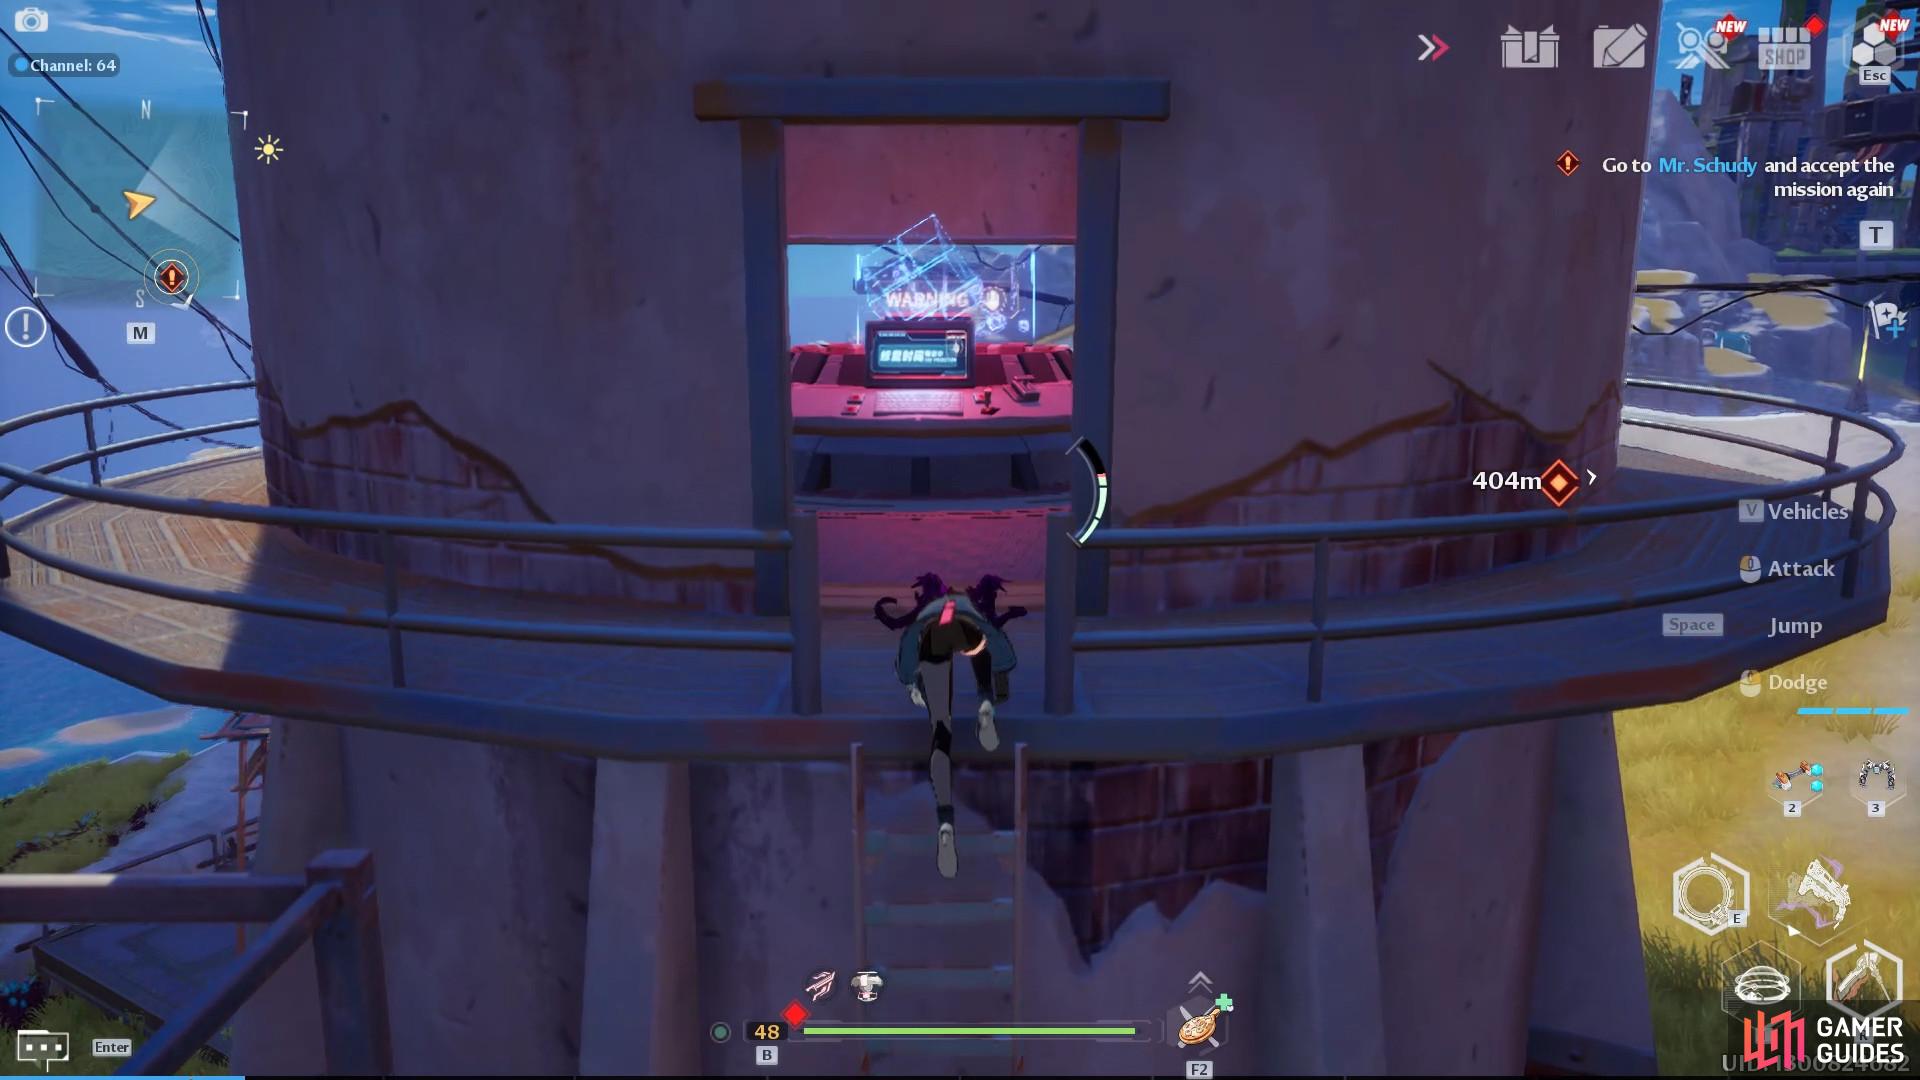 Head inside the tower at the southeast corner of the Ravager base and interact with the computer terminal in the room.